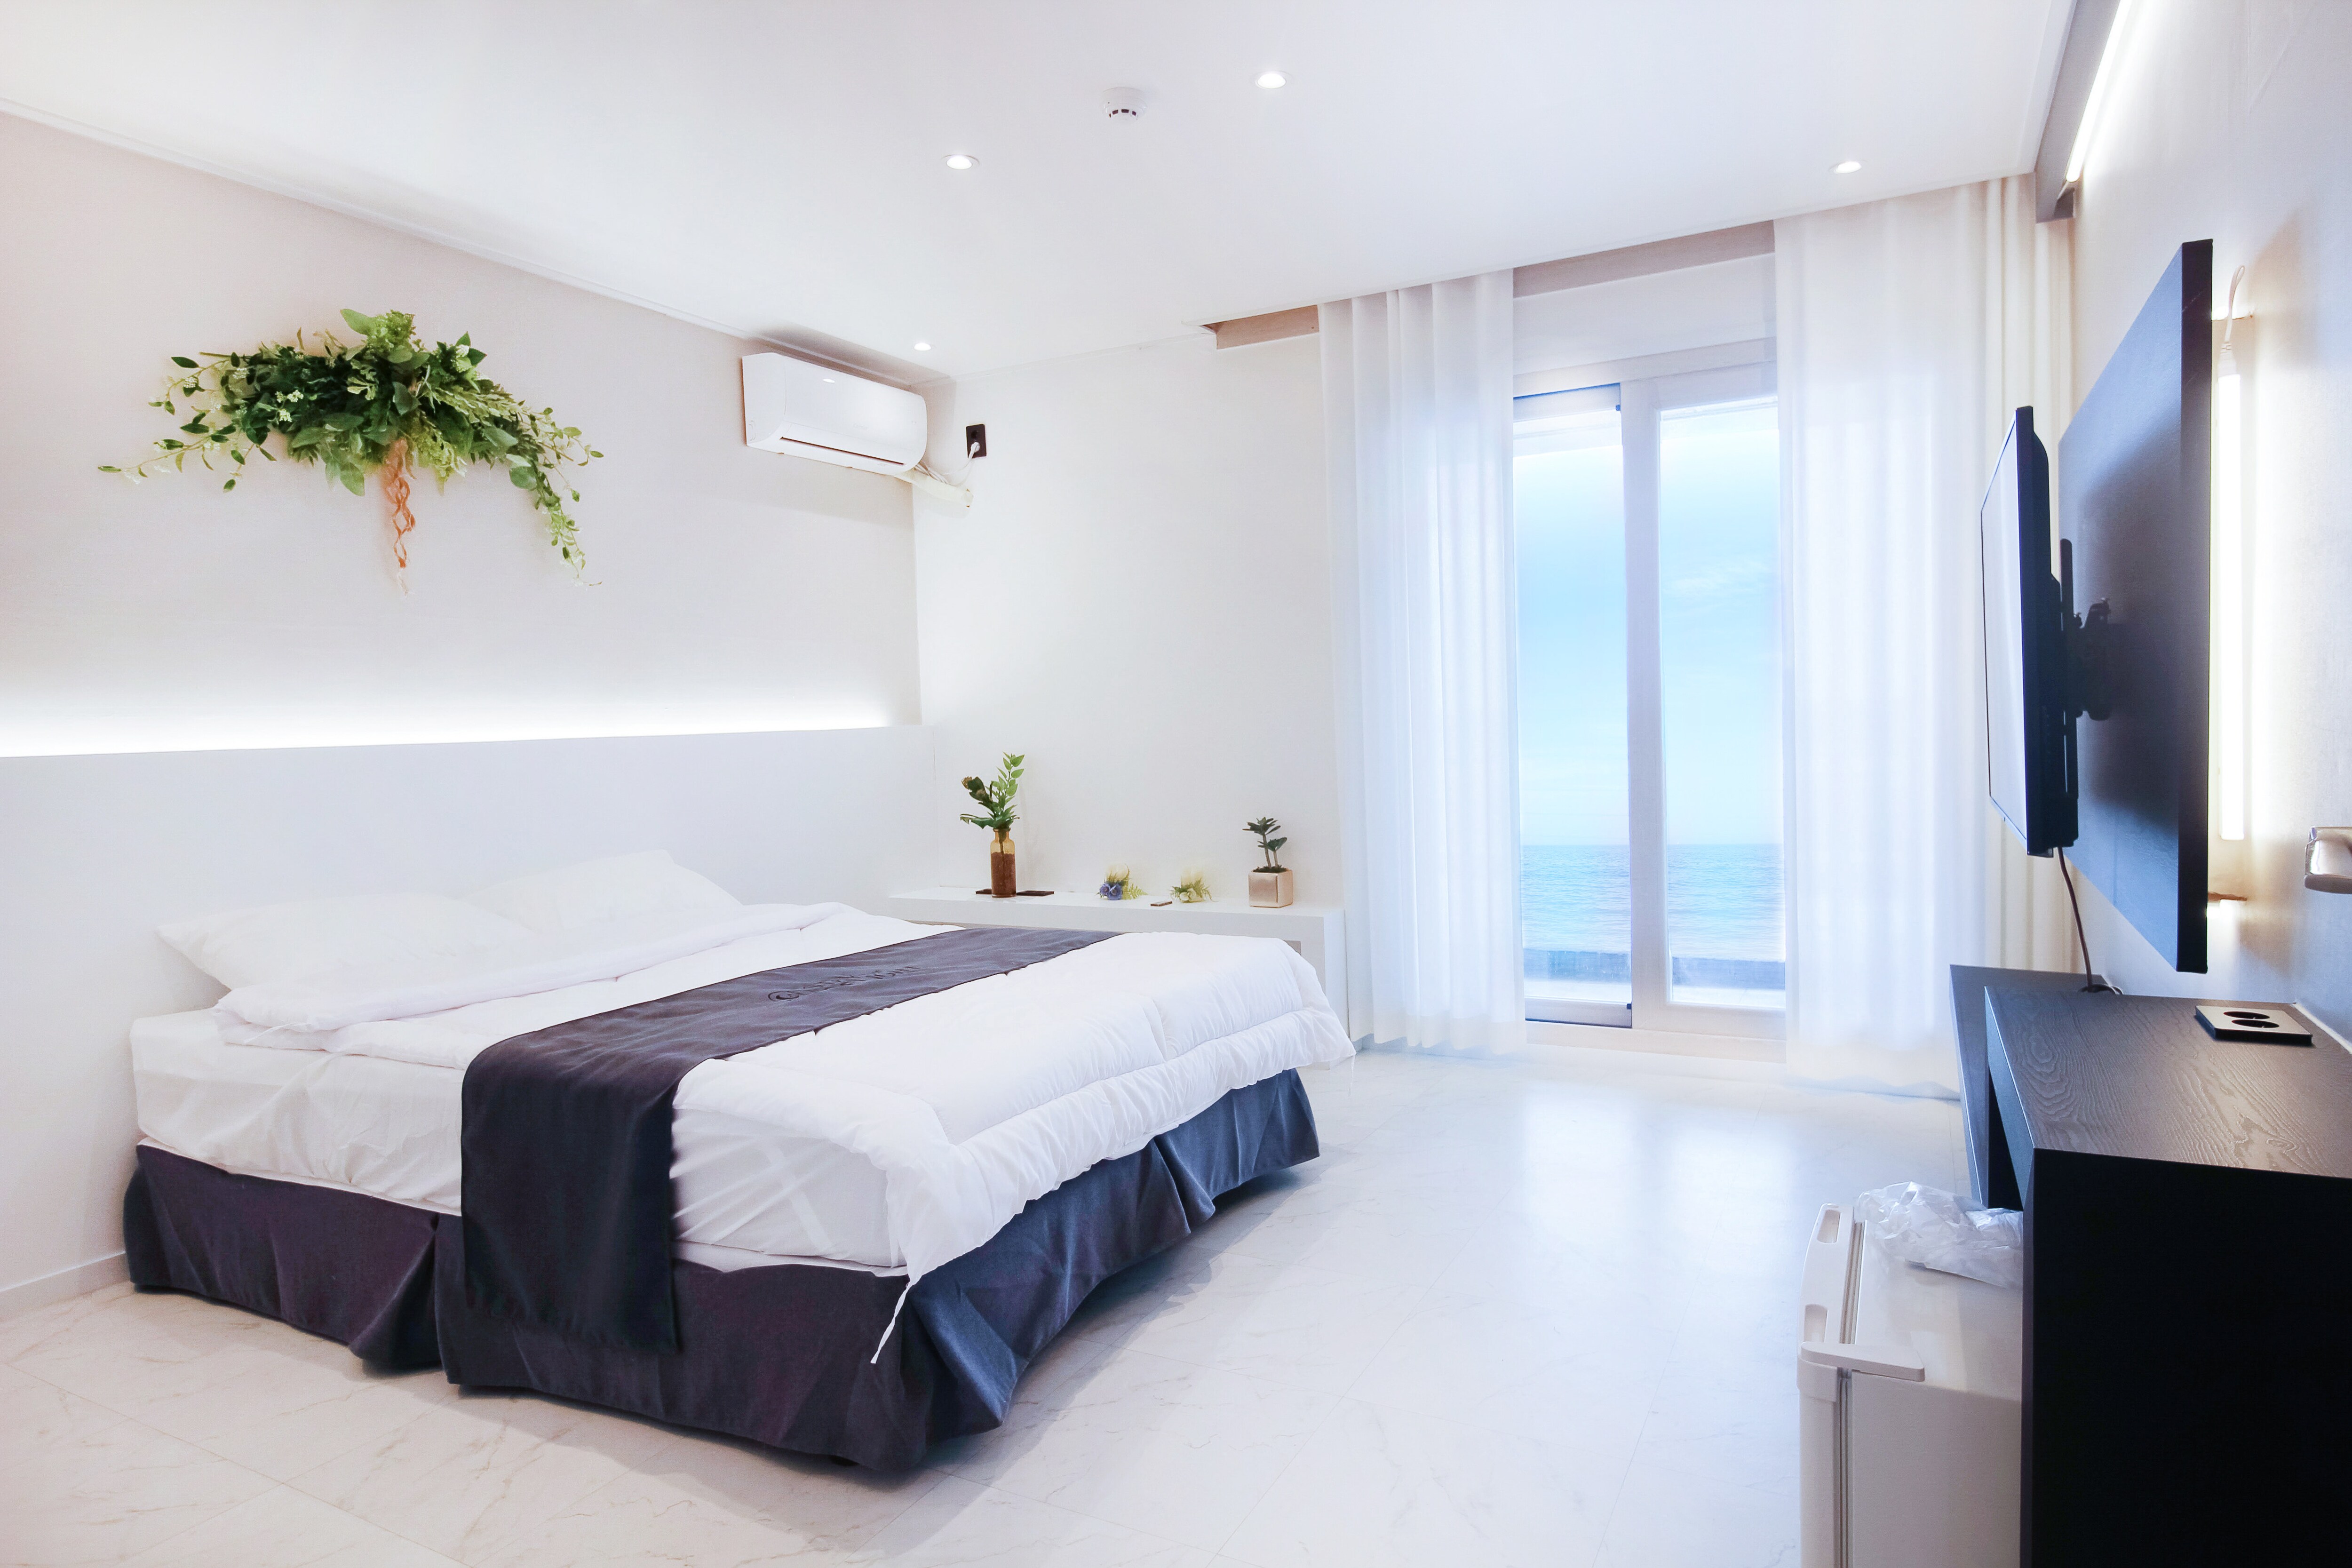 Property Image 1 - Fresh Cheerful Apartment with Ocean Views 12